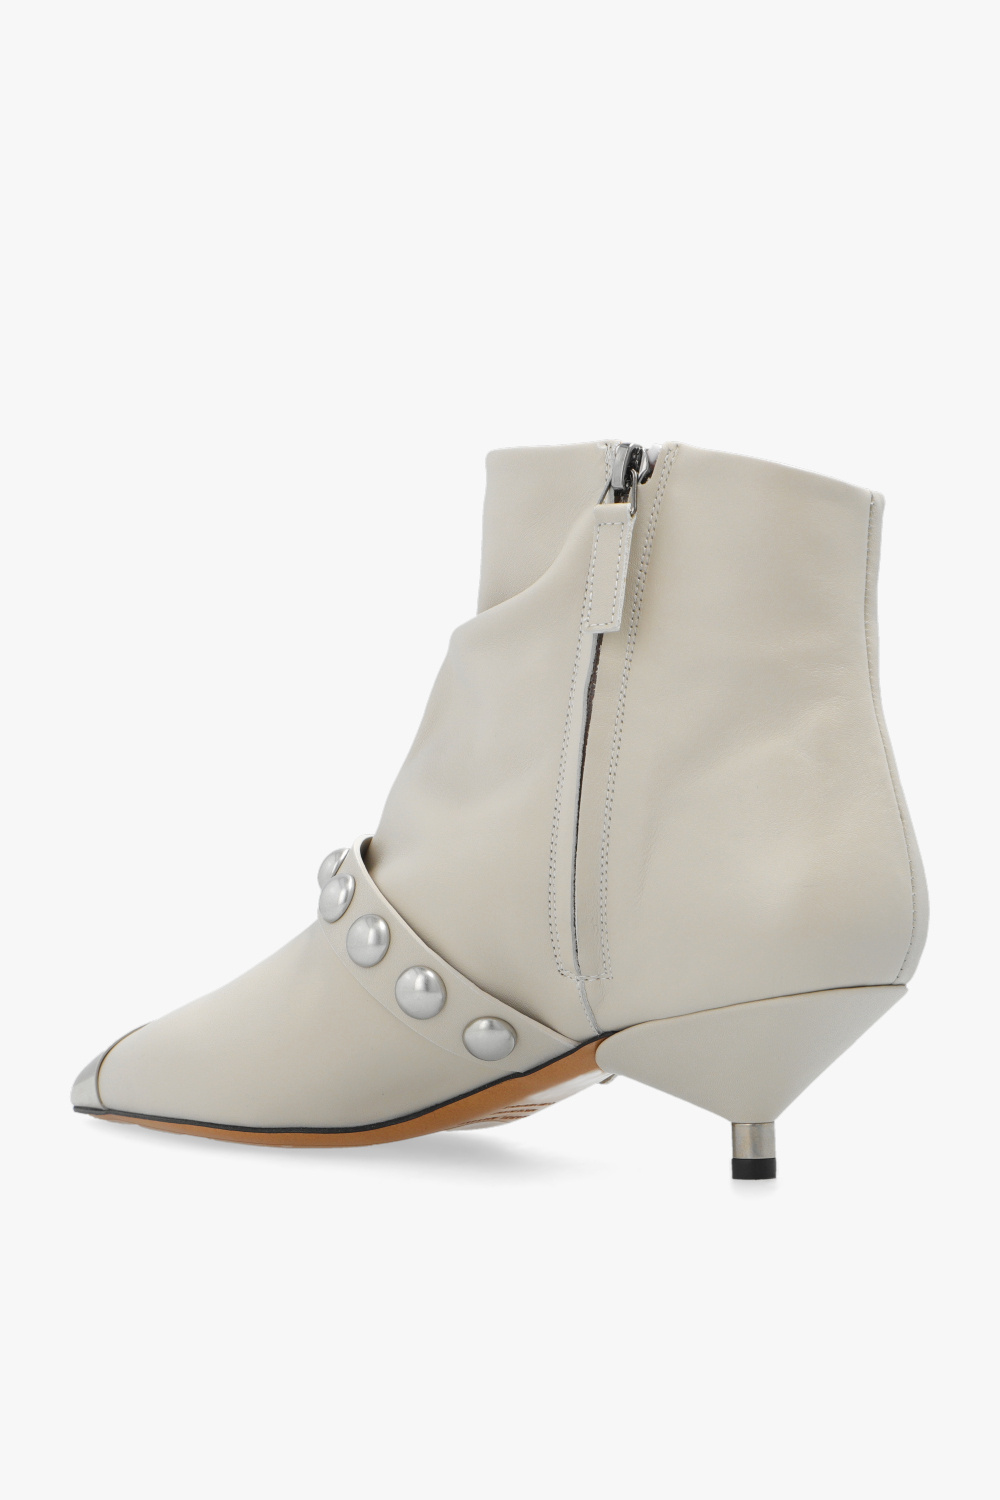 Isabel Marant Donatee Leather Ankle Boots in Black